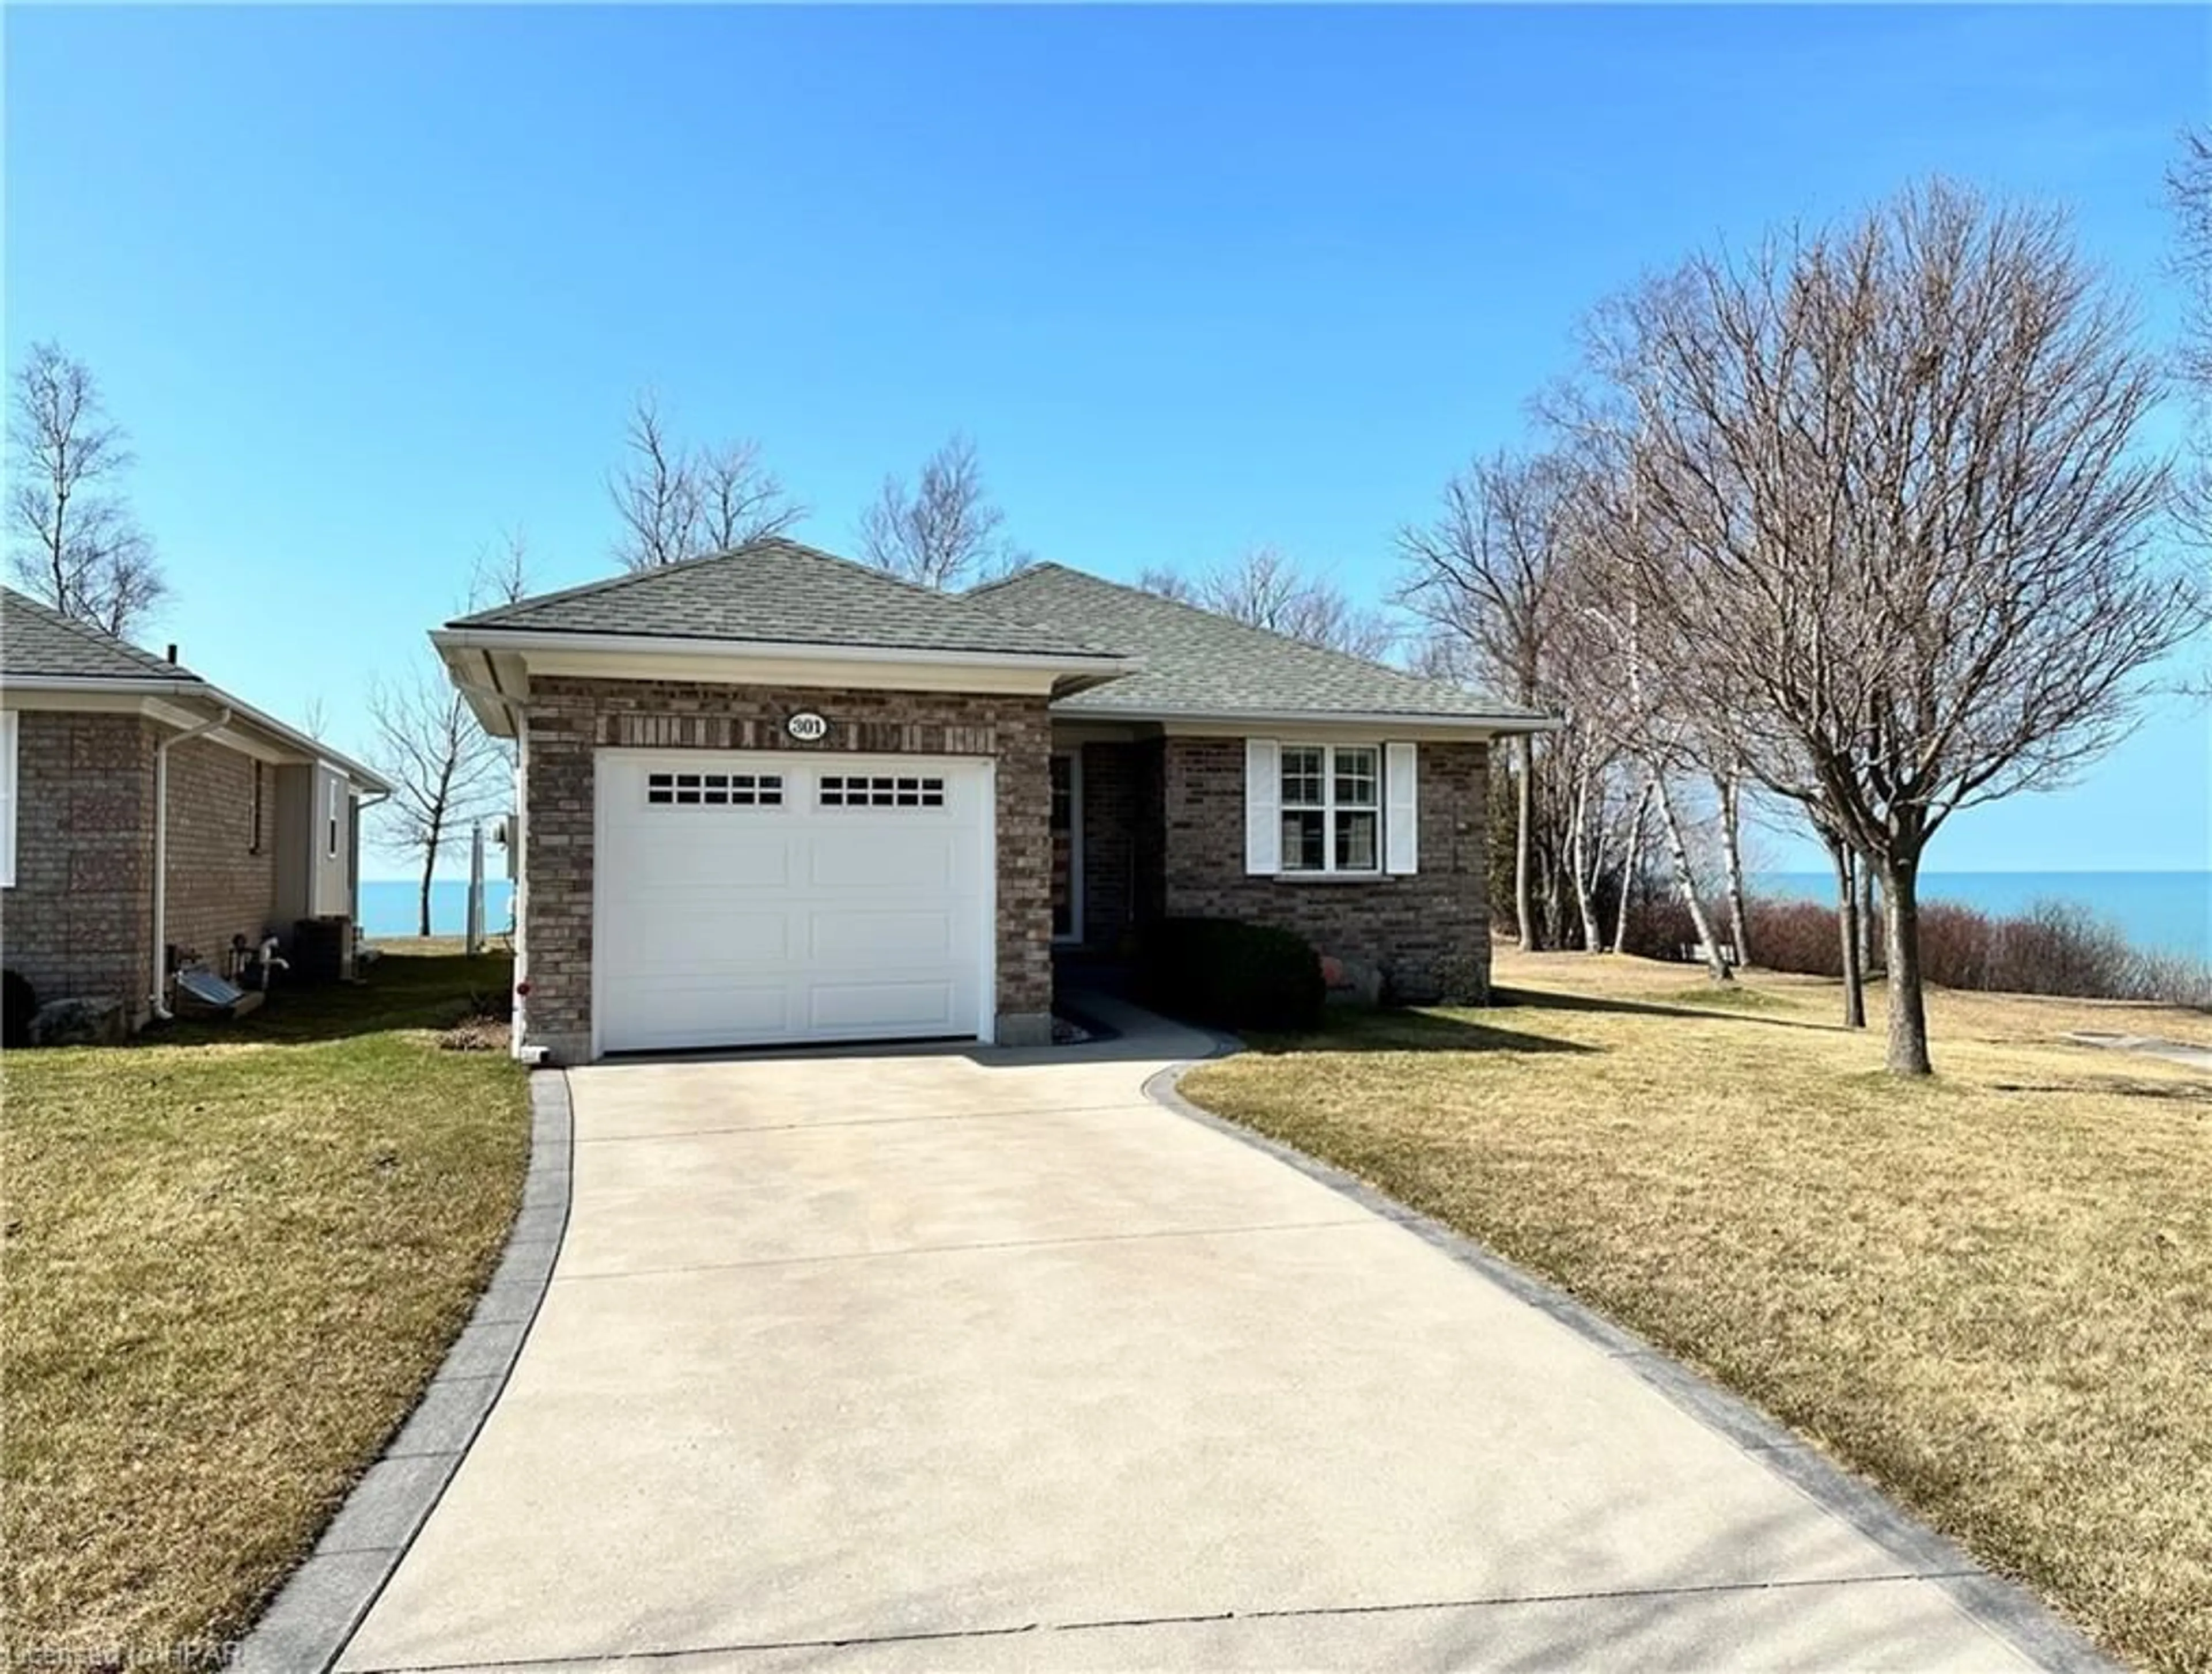 Frontside or backside of a home for 301 Bethune Cres, Goderich Ontario N7A 4M6